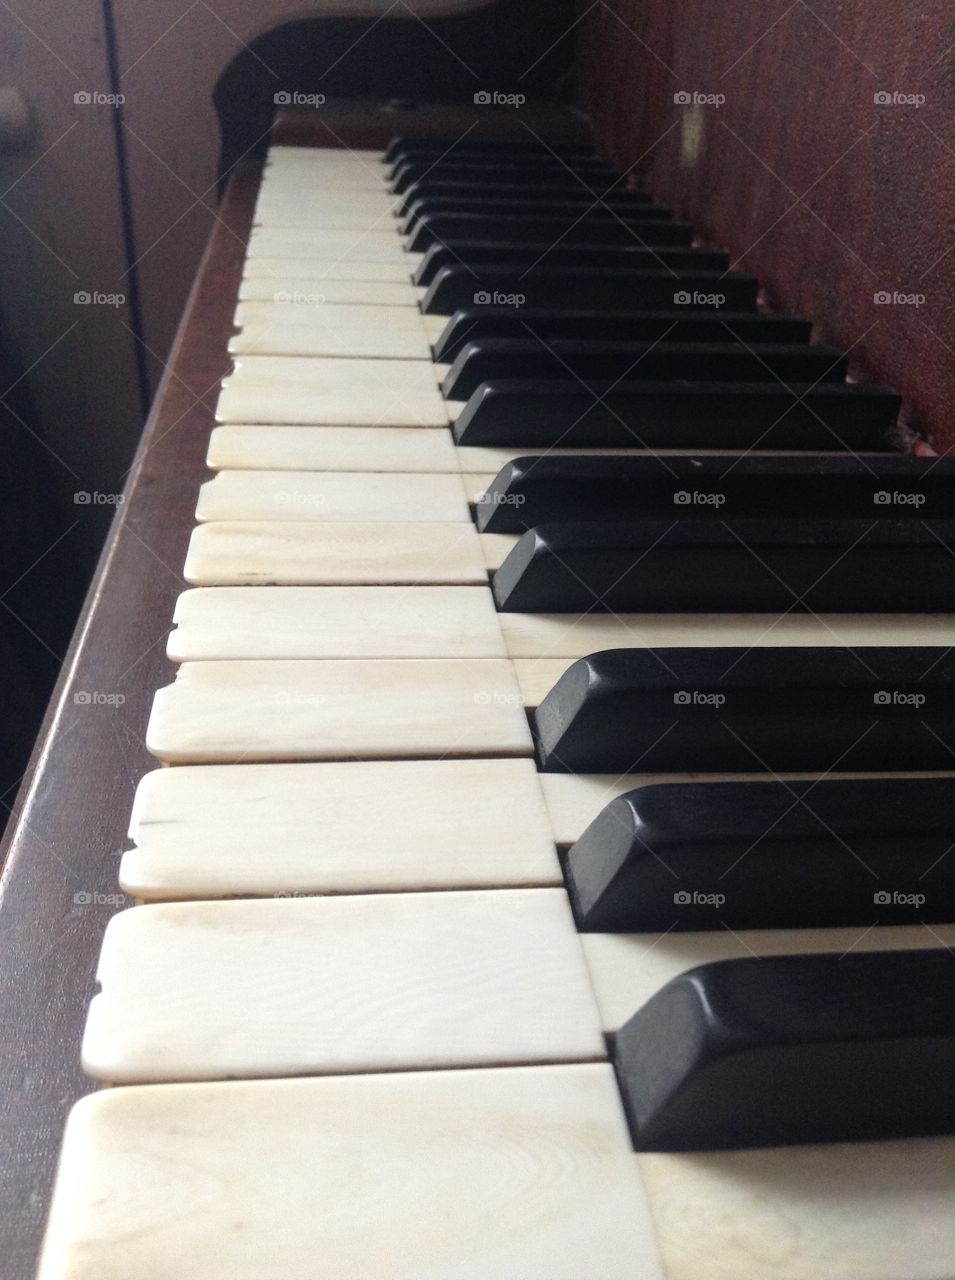 Antique piano with real ivory keys.